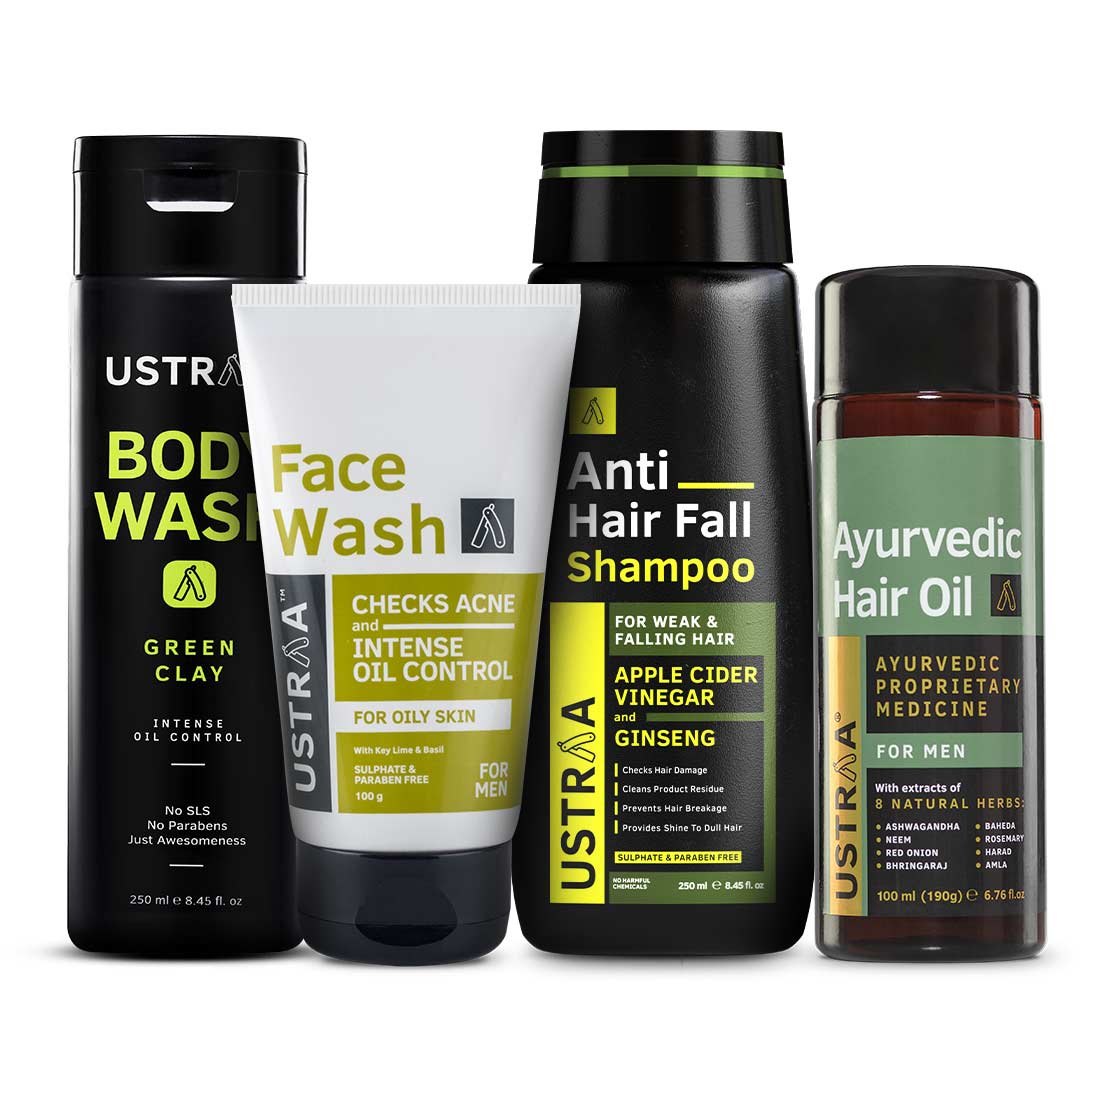 Ustraa Monthly Essential Kit for Men: Body Wash-Green Clay, Face Wash Oil Skin, Anti Hairfall shampoo & Ayurvedic Hair Oil